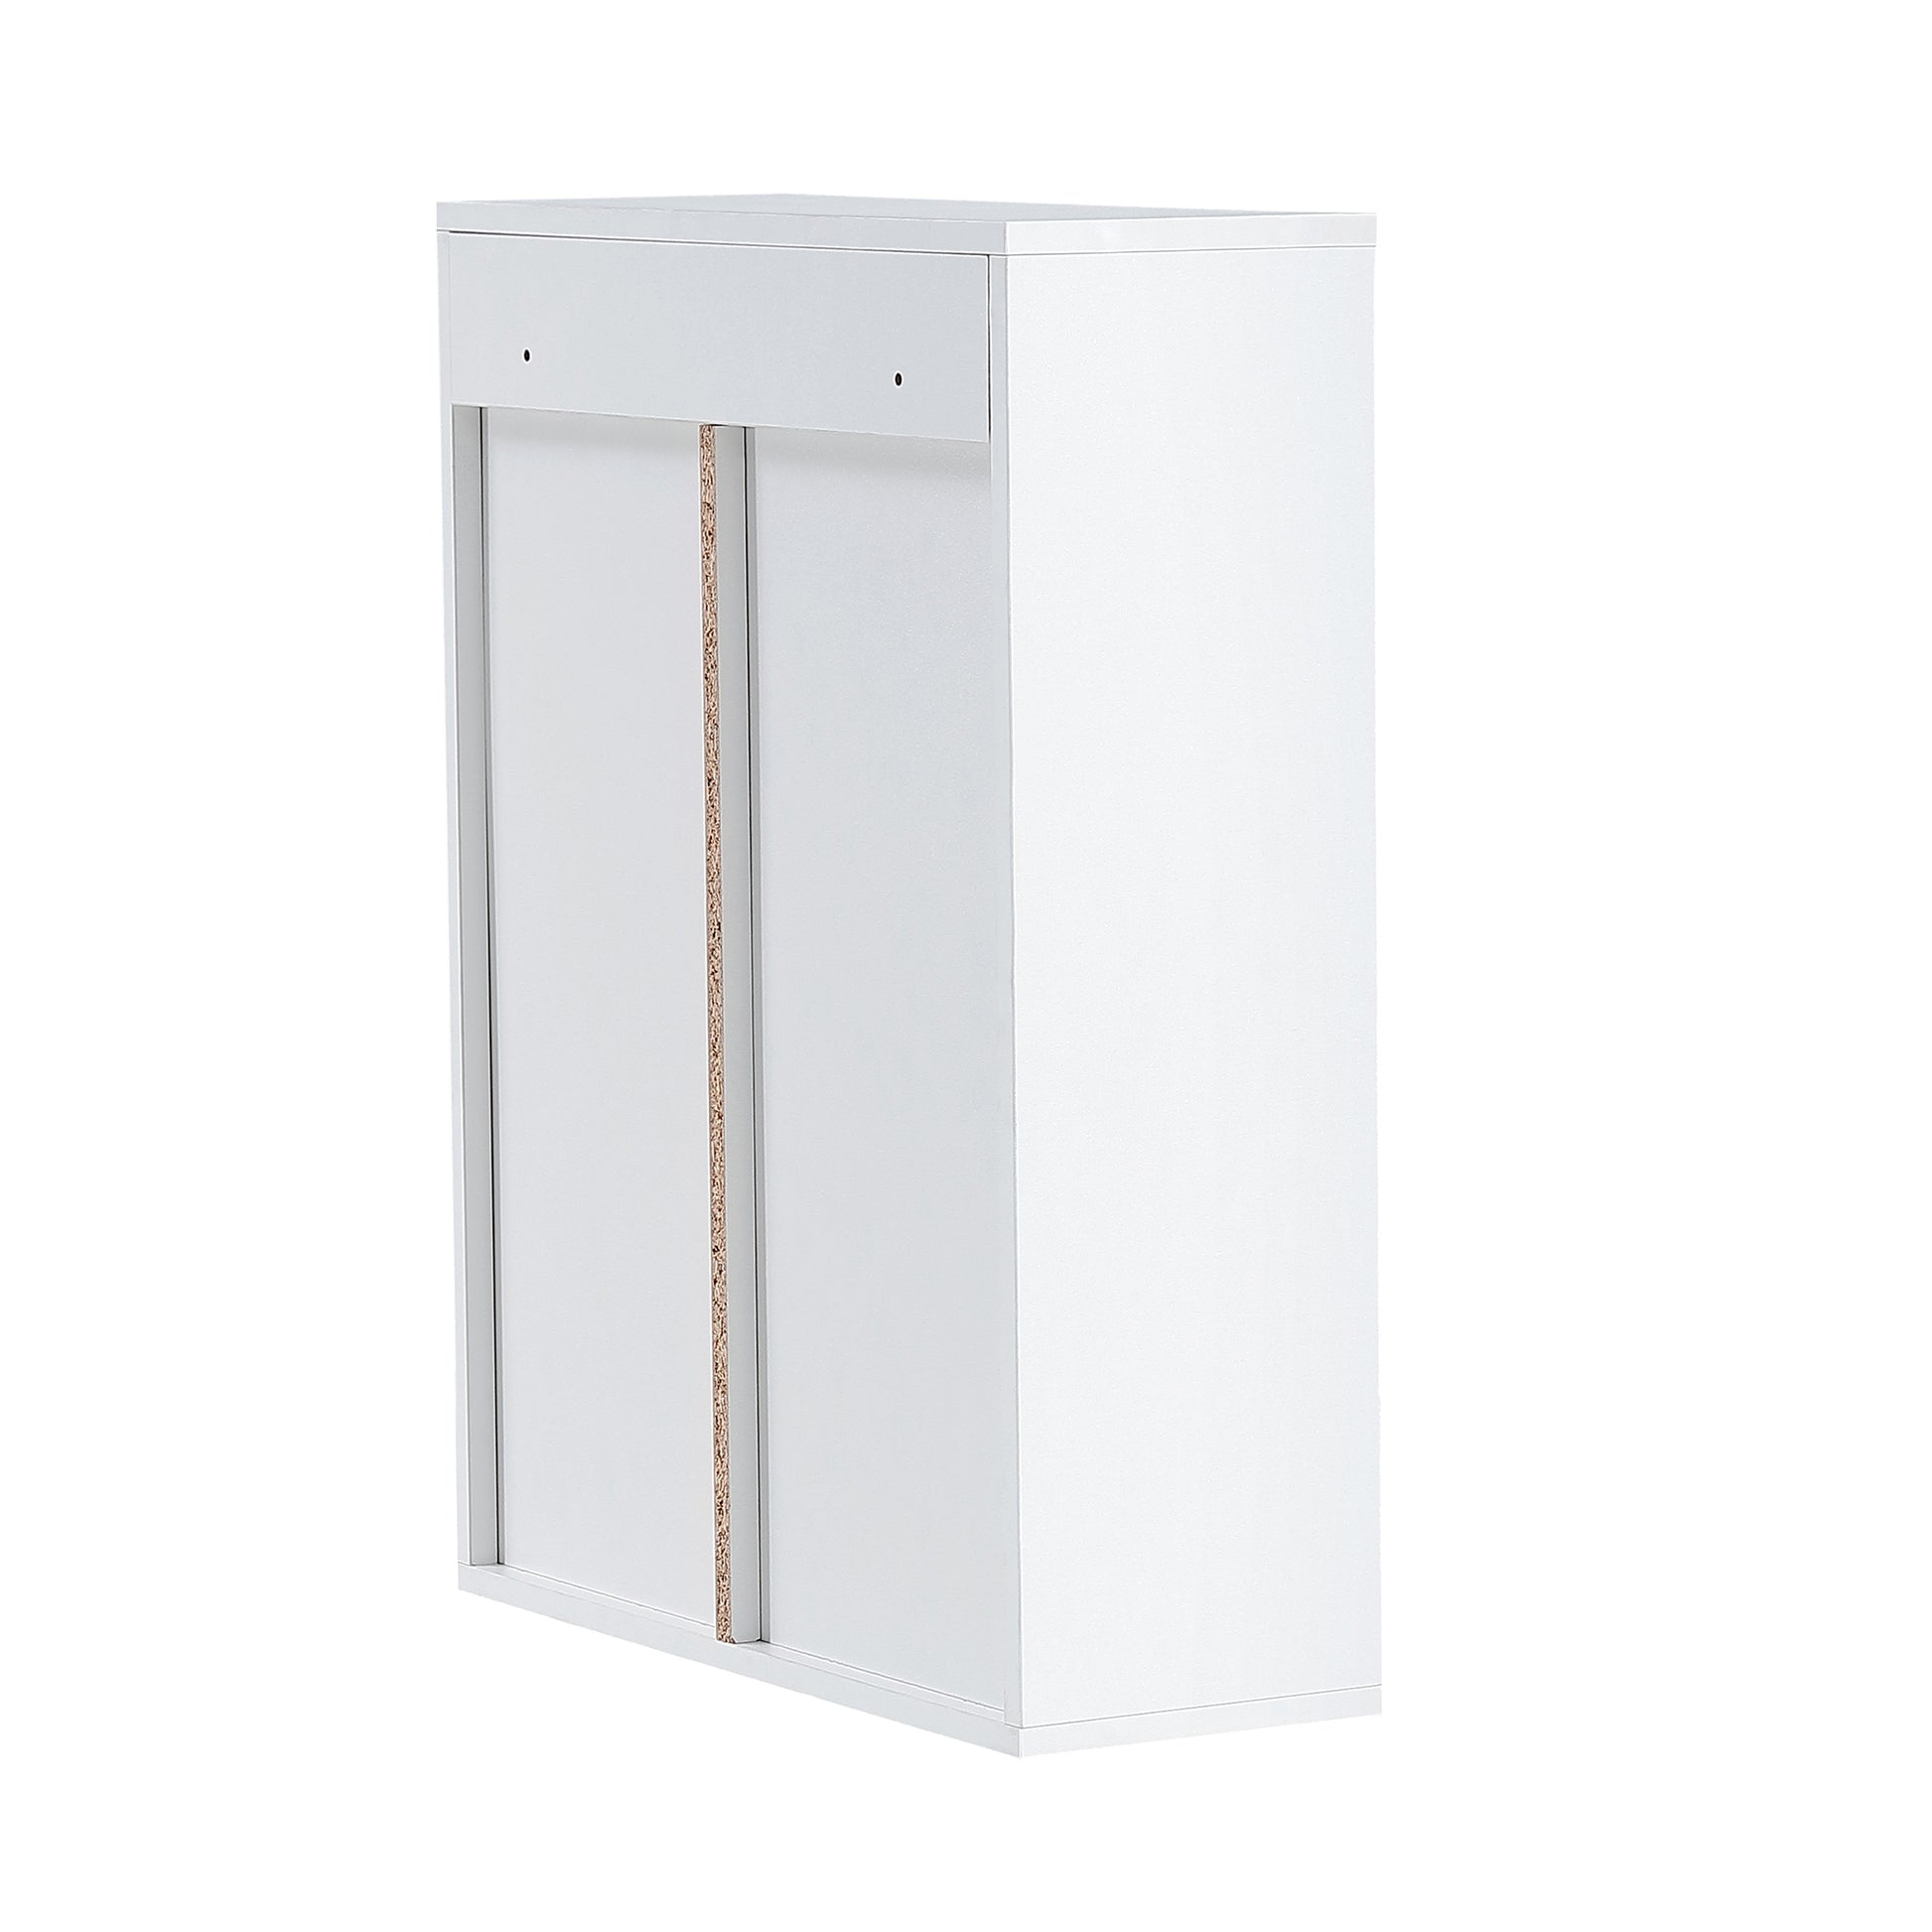 Wood wall mounted storage cabinet, 5 layer toilet white-mdf